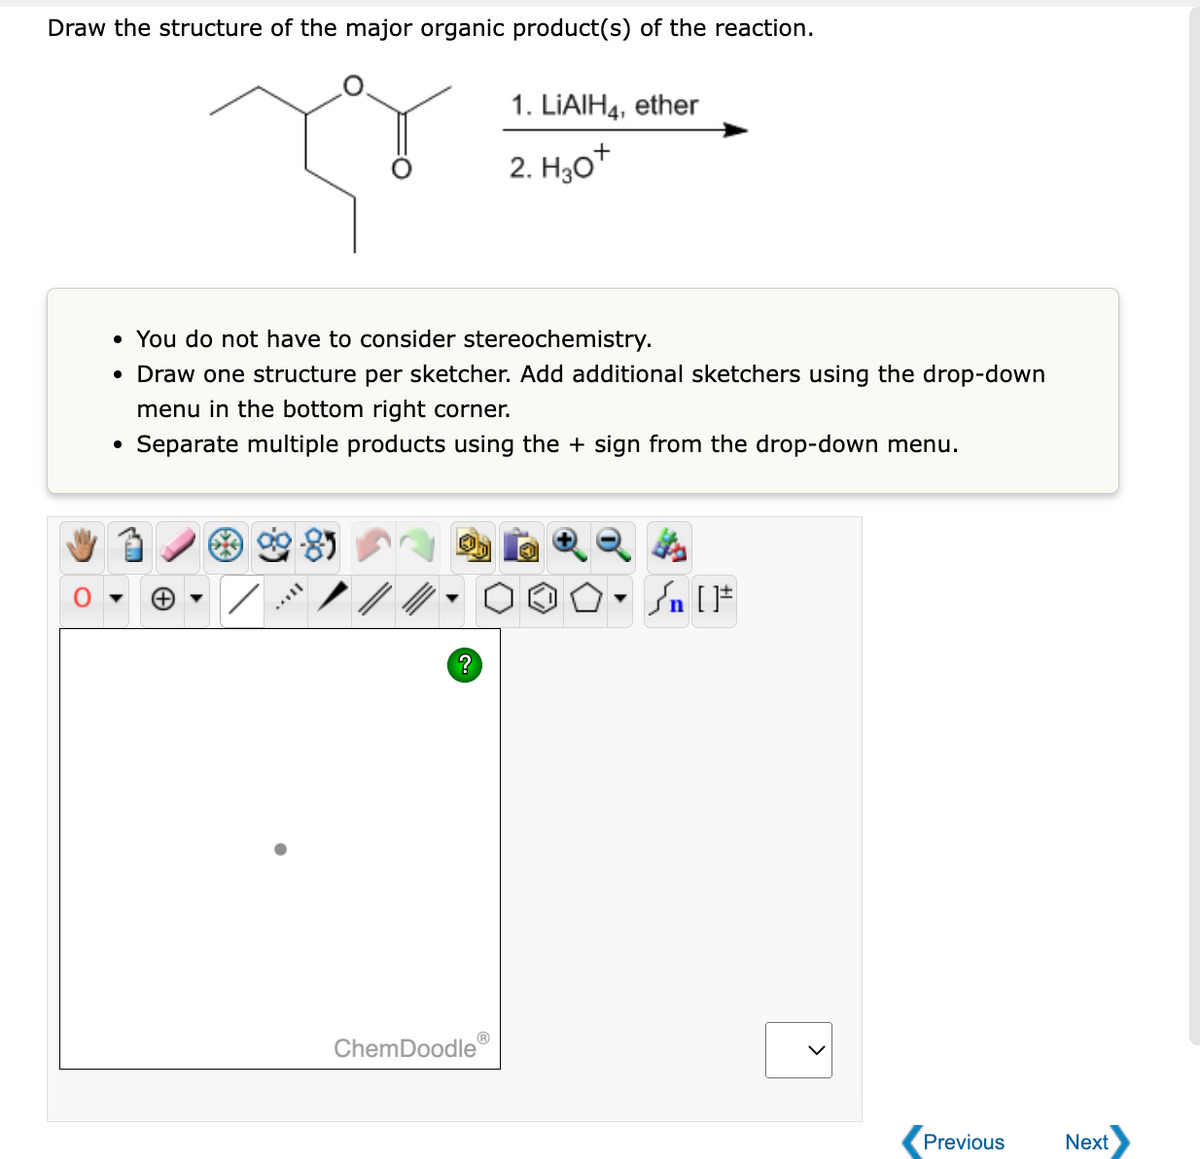 Draw the structure of the major organic product(s) of the reaction.
• You do not have to consider stereochemistry.
• Draw one structure per sketcher. Add additional sketchers using the drop-down
menu in the bottom right corner.
Separate multiple products using the + sign from the drop-down menu.
TAYY
?
Ⓡ
1. LIAIH4, ether
2. H₂O+
ChemDoodle
) * n [ ]#
Previous
Next